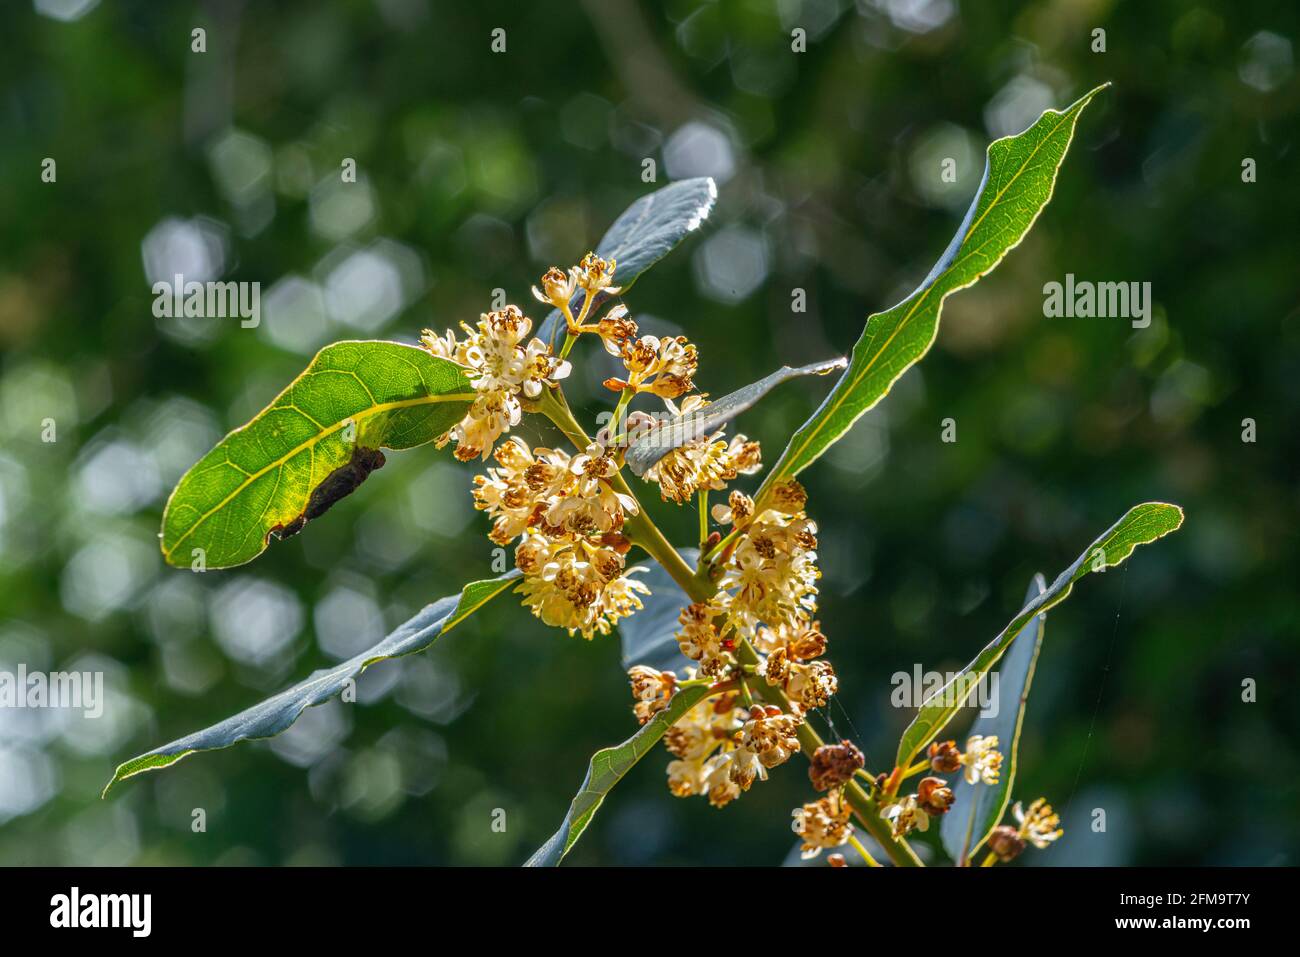 Flowering Laurel, Laurus nobilis L., is an aromatic and officinal plant belonging to the Lauraceae family. Abruzzo, Italy, Europe Stock Photo